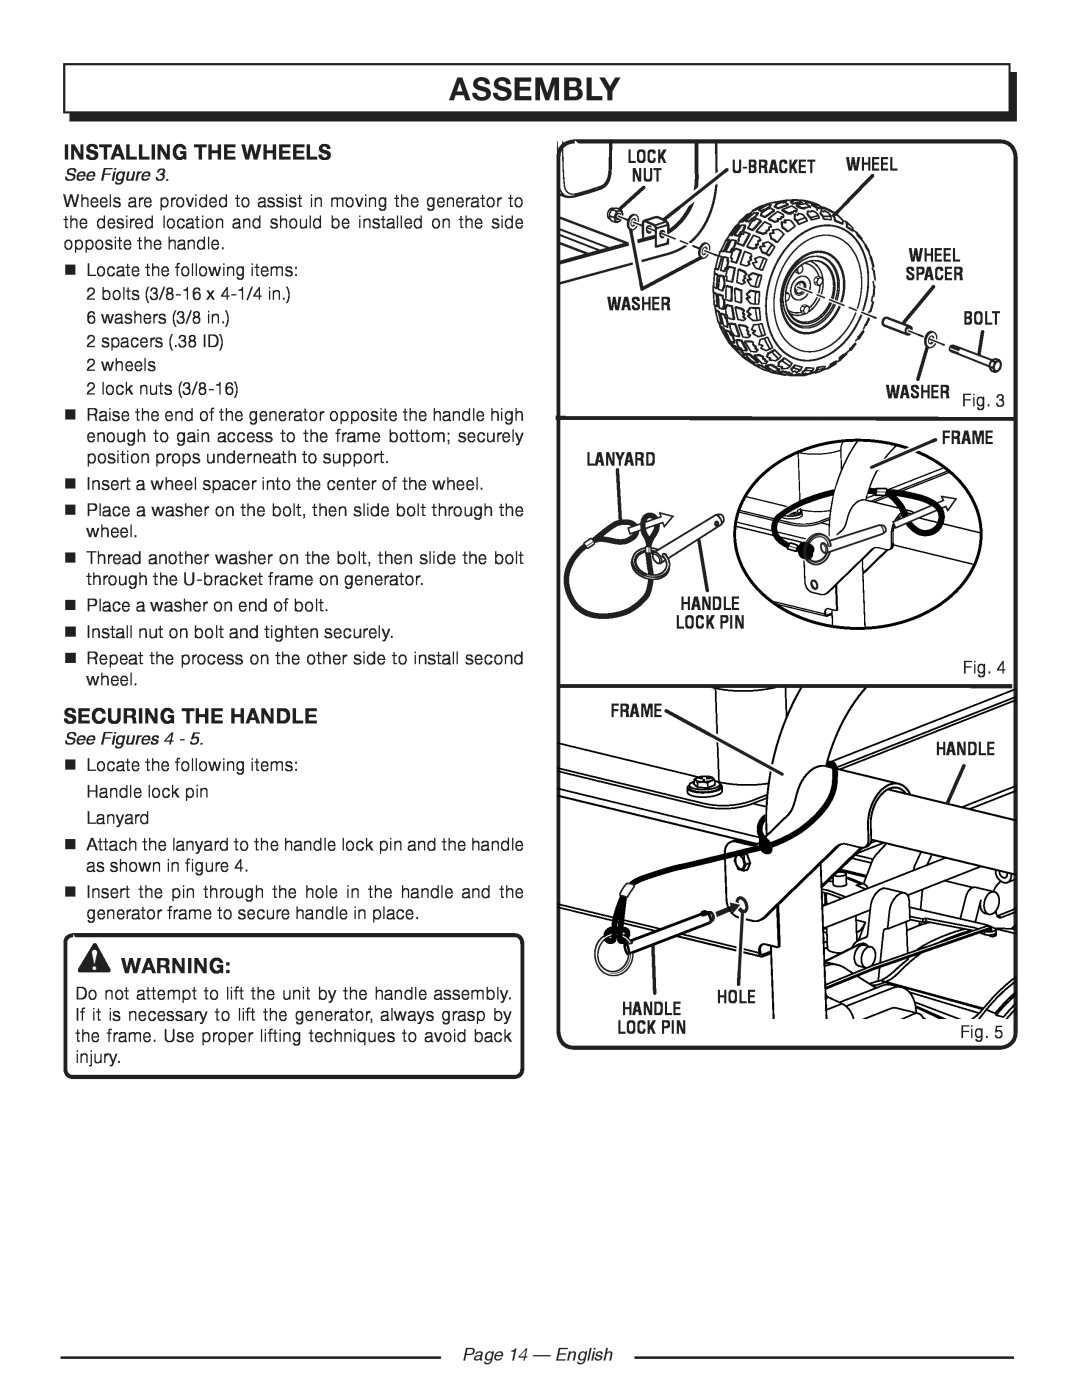 Homelite HG5700 assembly, installing the wheels, securing the handle, See Figures, Page 14 - English 